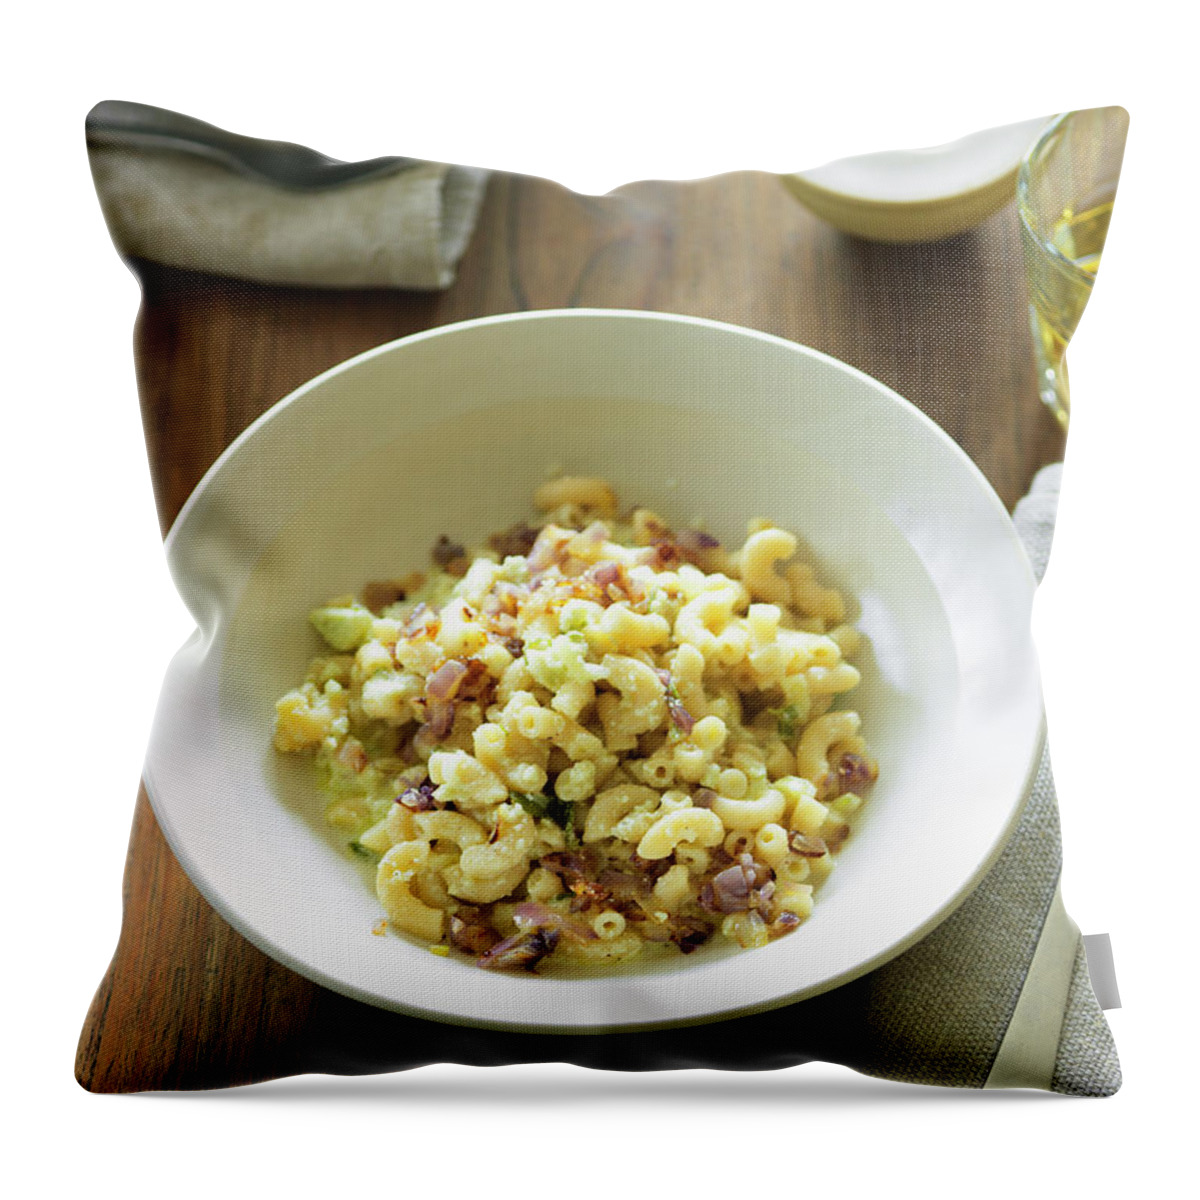 Ip_12677567 Throw Pillow featuring the photograph Elbow Macaroni With Schabziger Cheese Sauce by Andreas Thumm